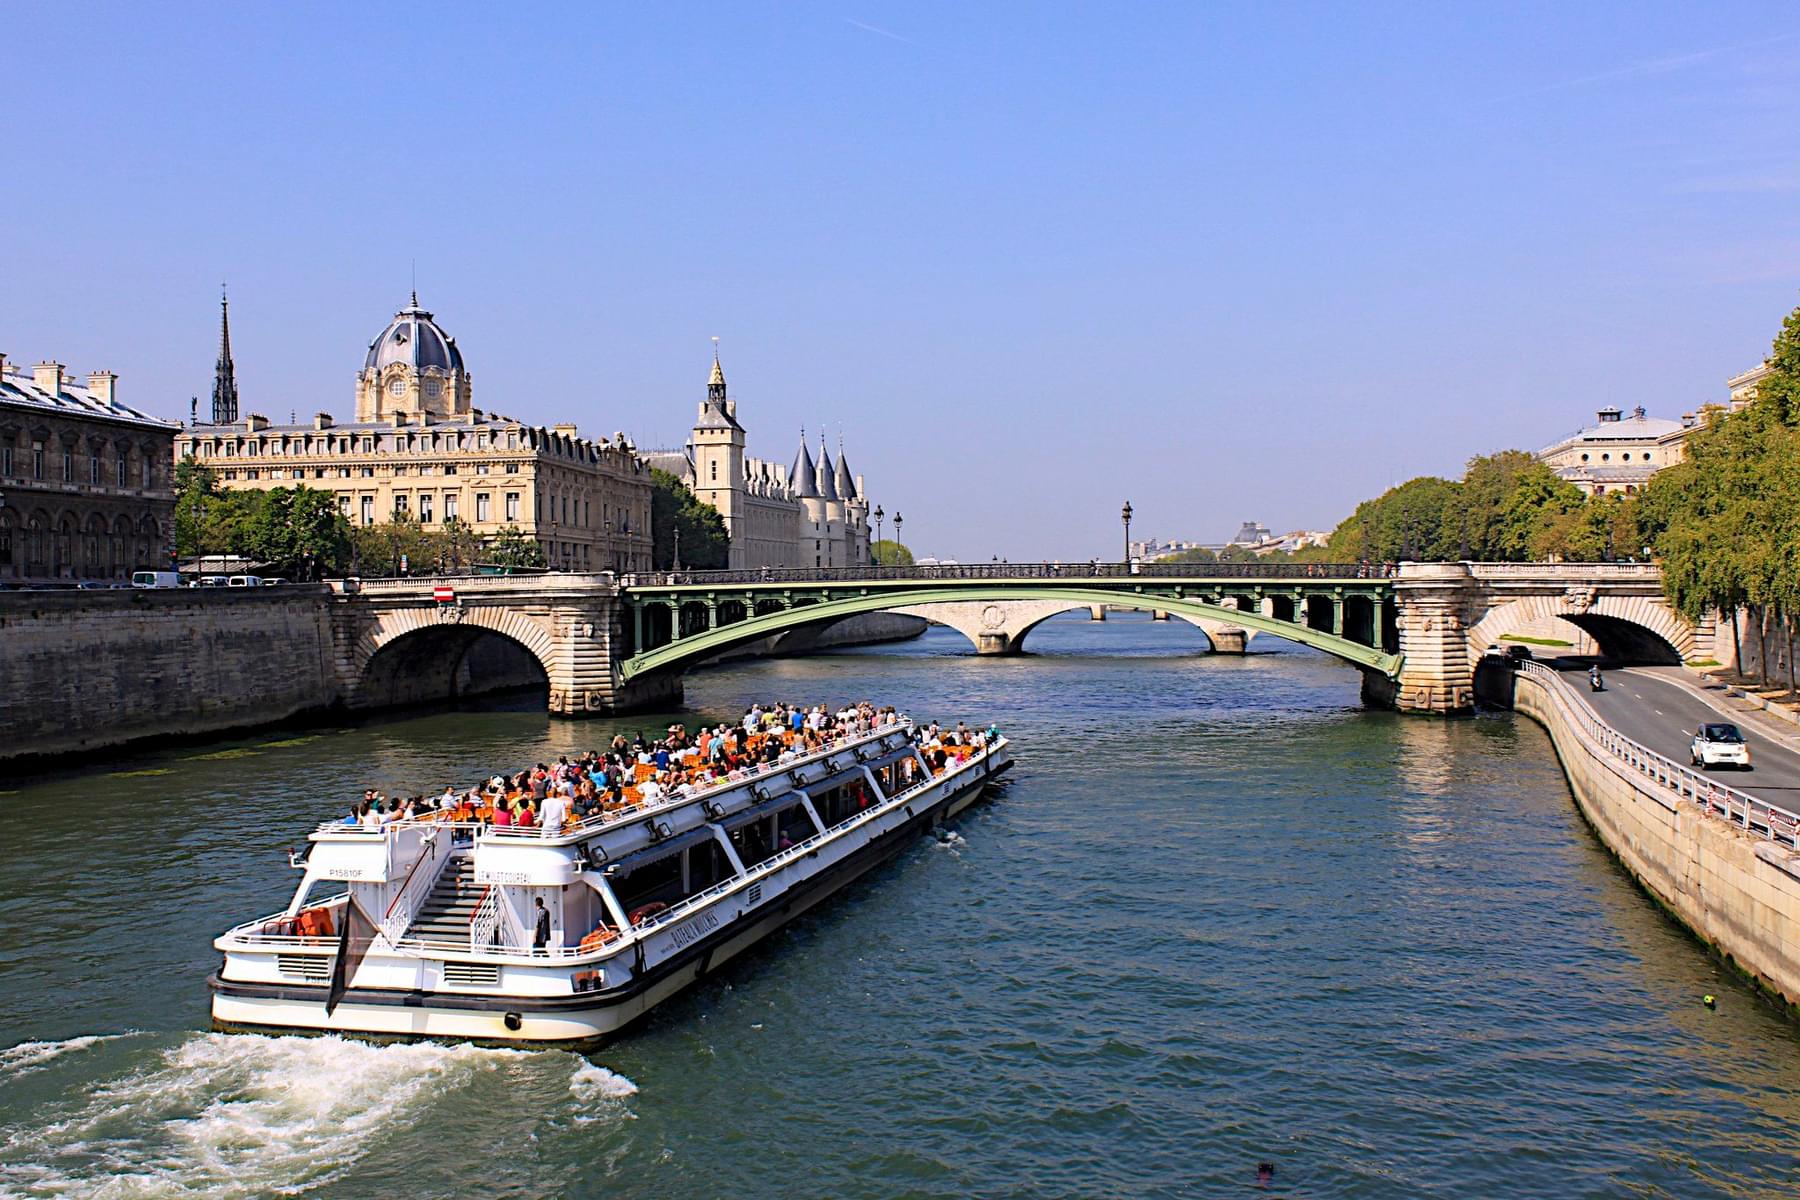 Bateaux Parisiens: Dinner Cruise with Optional Champagne Tickets